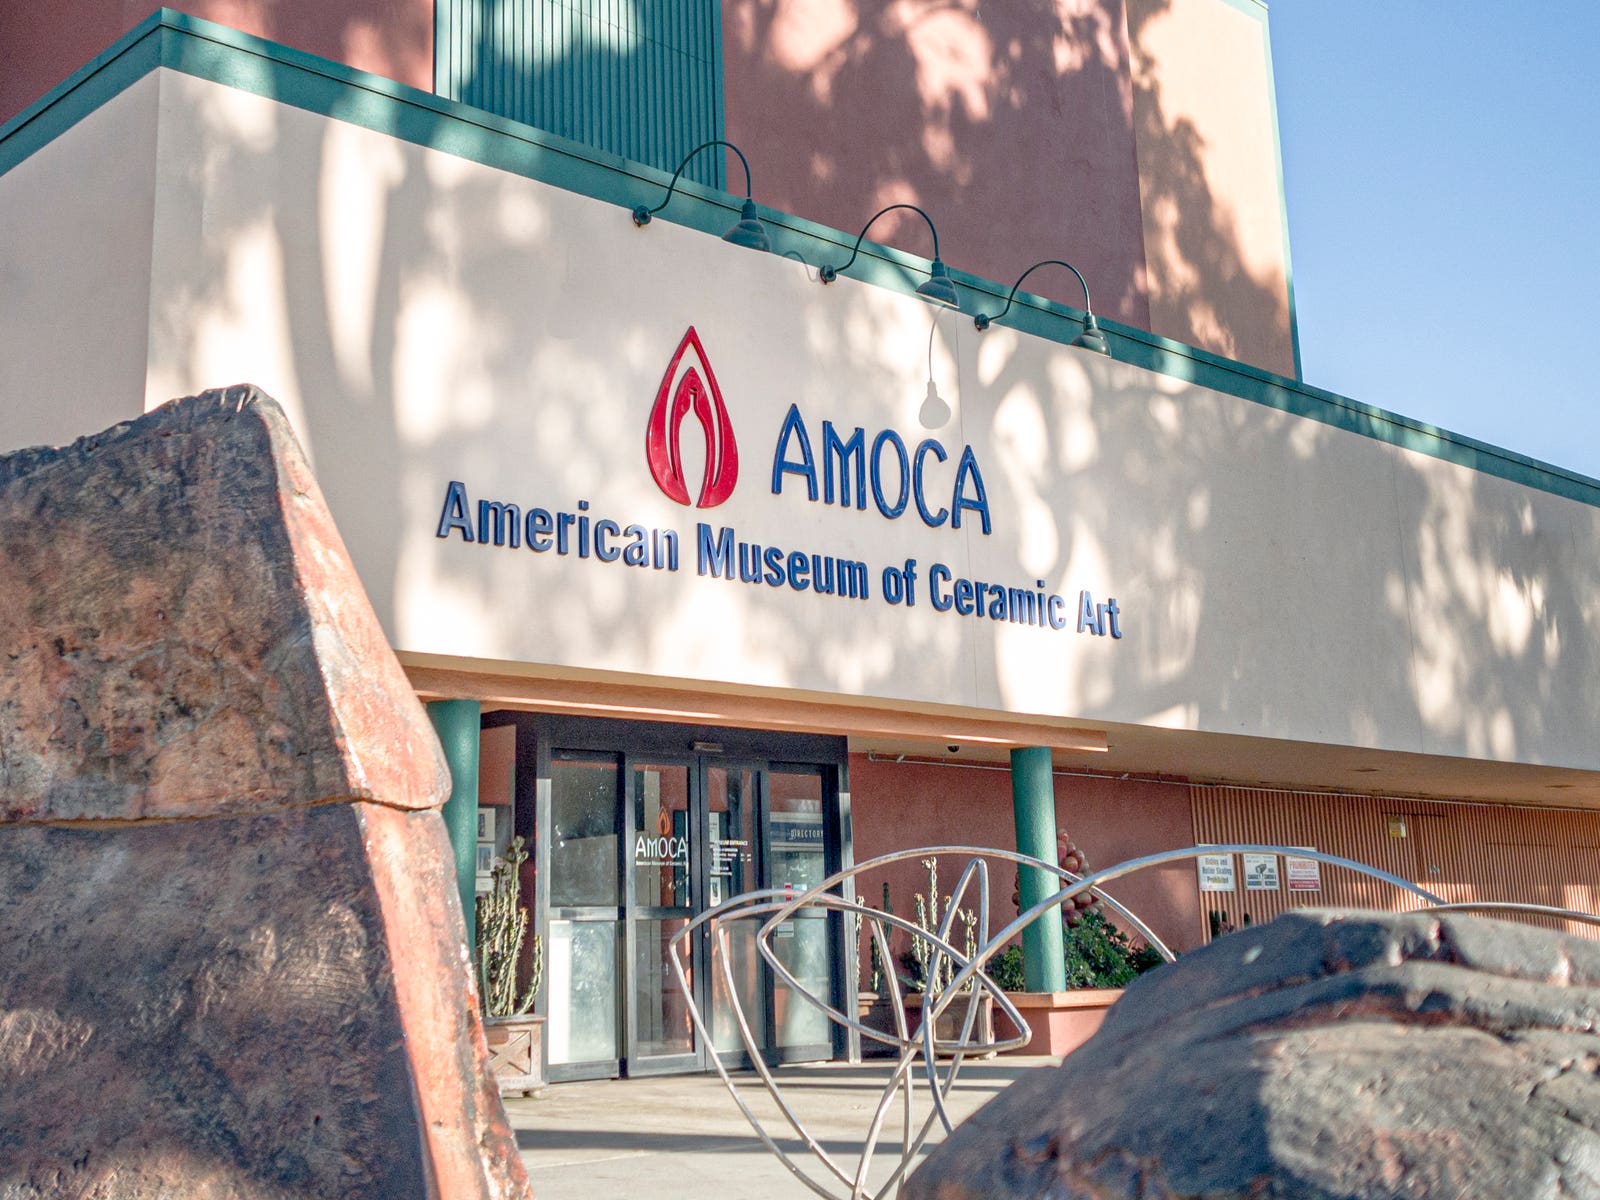 entrance to the American Museum of Ceramic Art